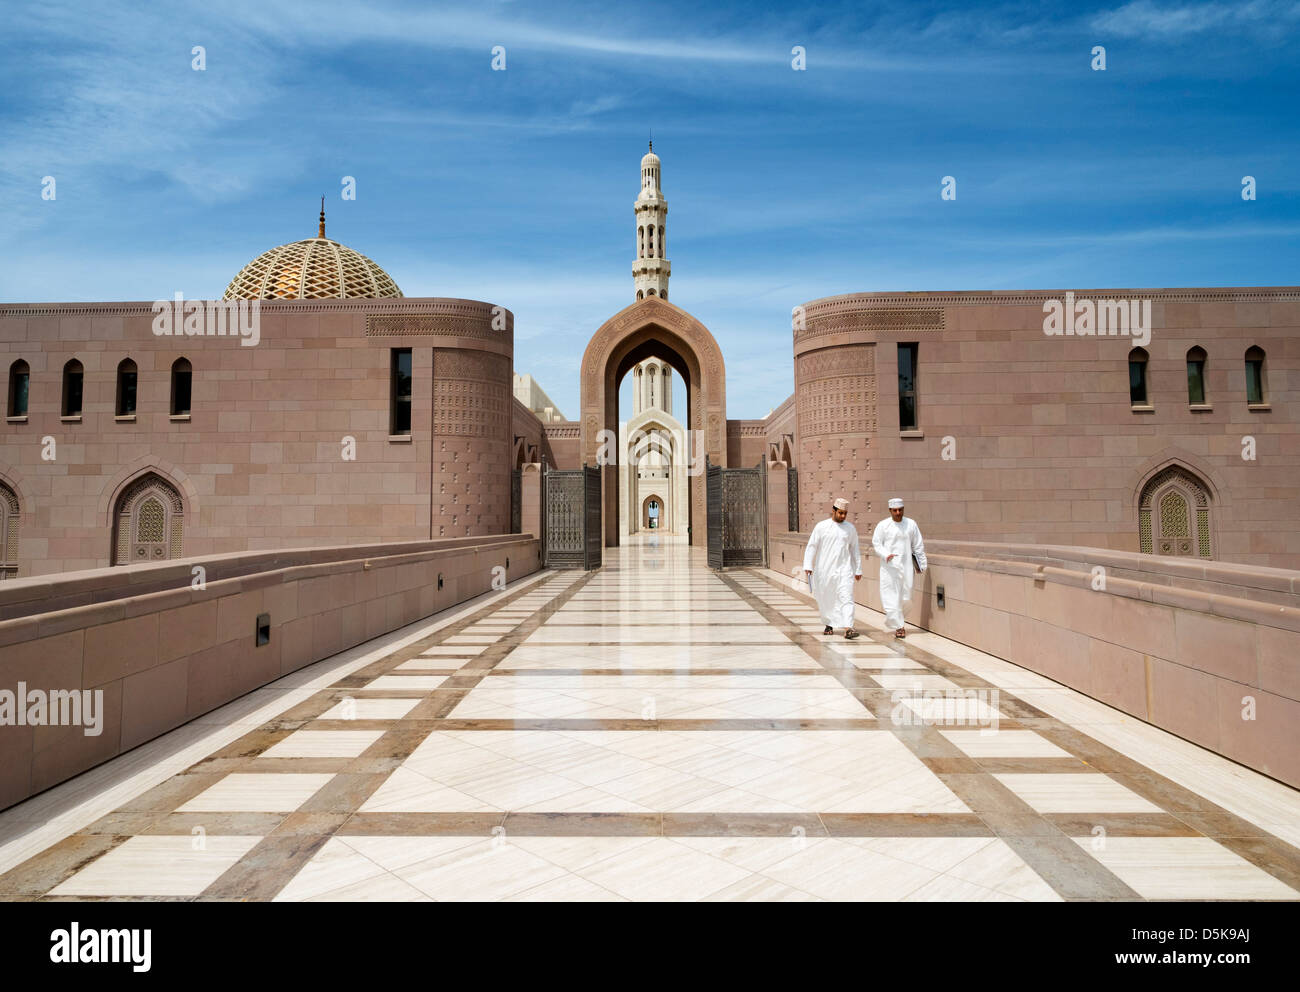 Sultan Qaboos Grand Mosque in Muscat Oman Middle East Stock Photo